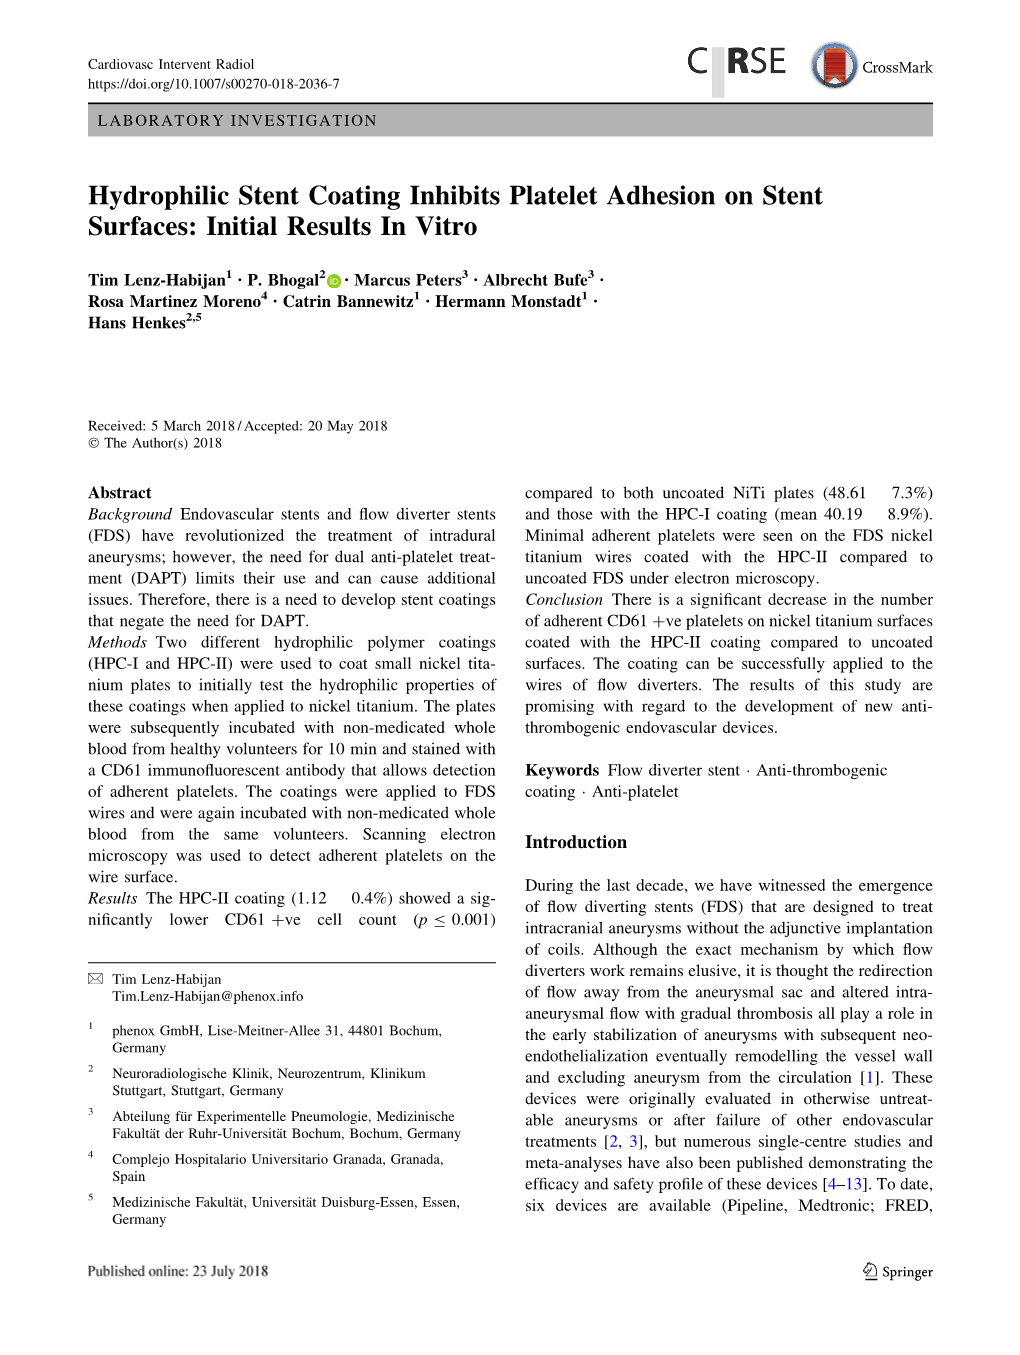 Hydrophilic Stent Coating Inhibits Platelet Adhesion on Stent Surfaces: Initial Results in Vitro